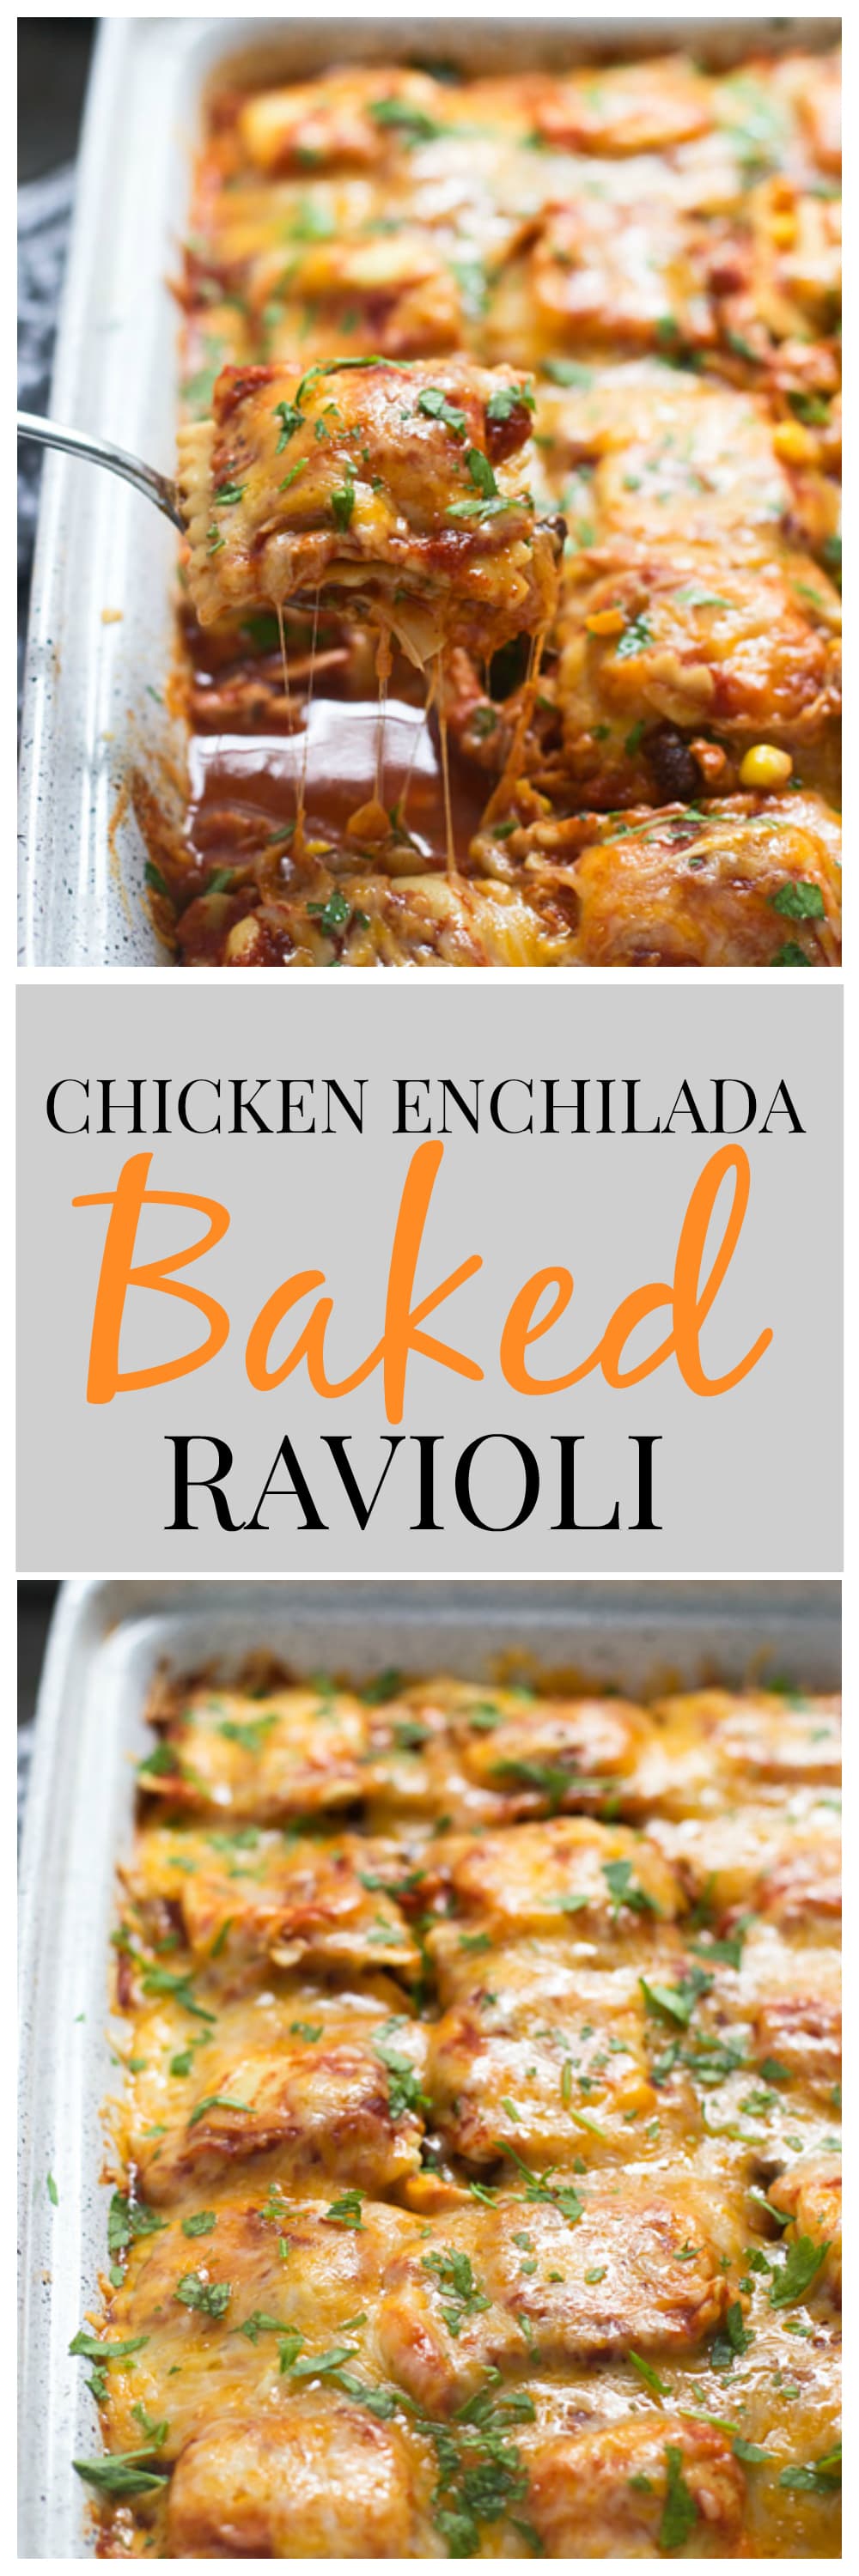 Chicken Enchilada Baked Ravioli - An easy, weeknight dinner the whole family will love! 